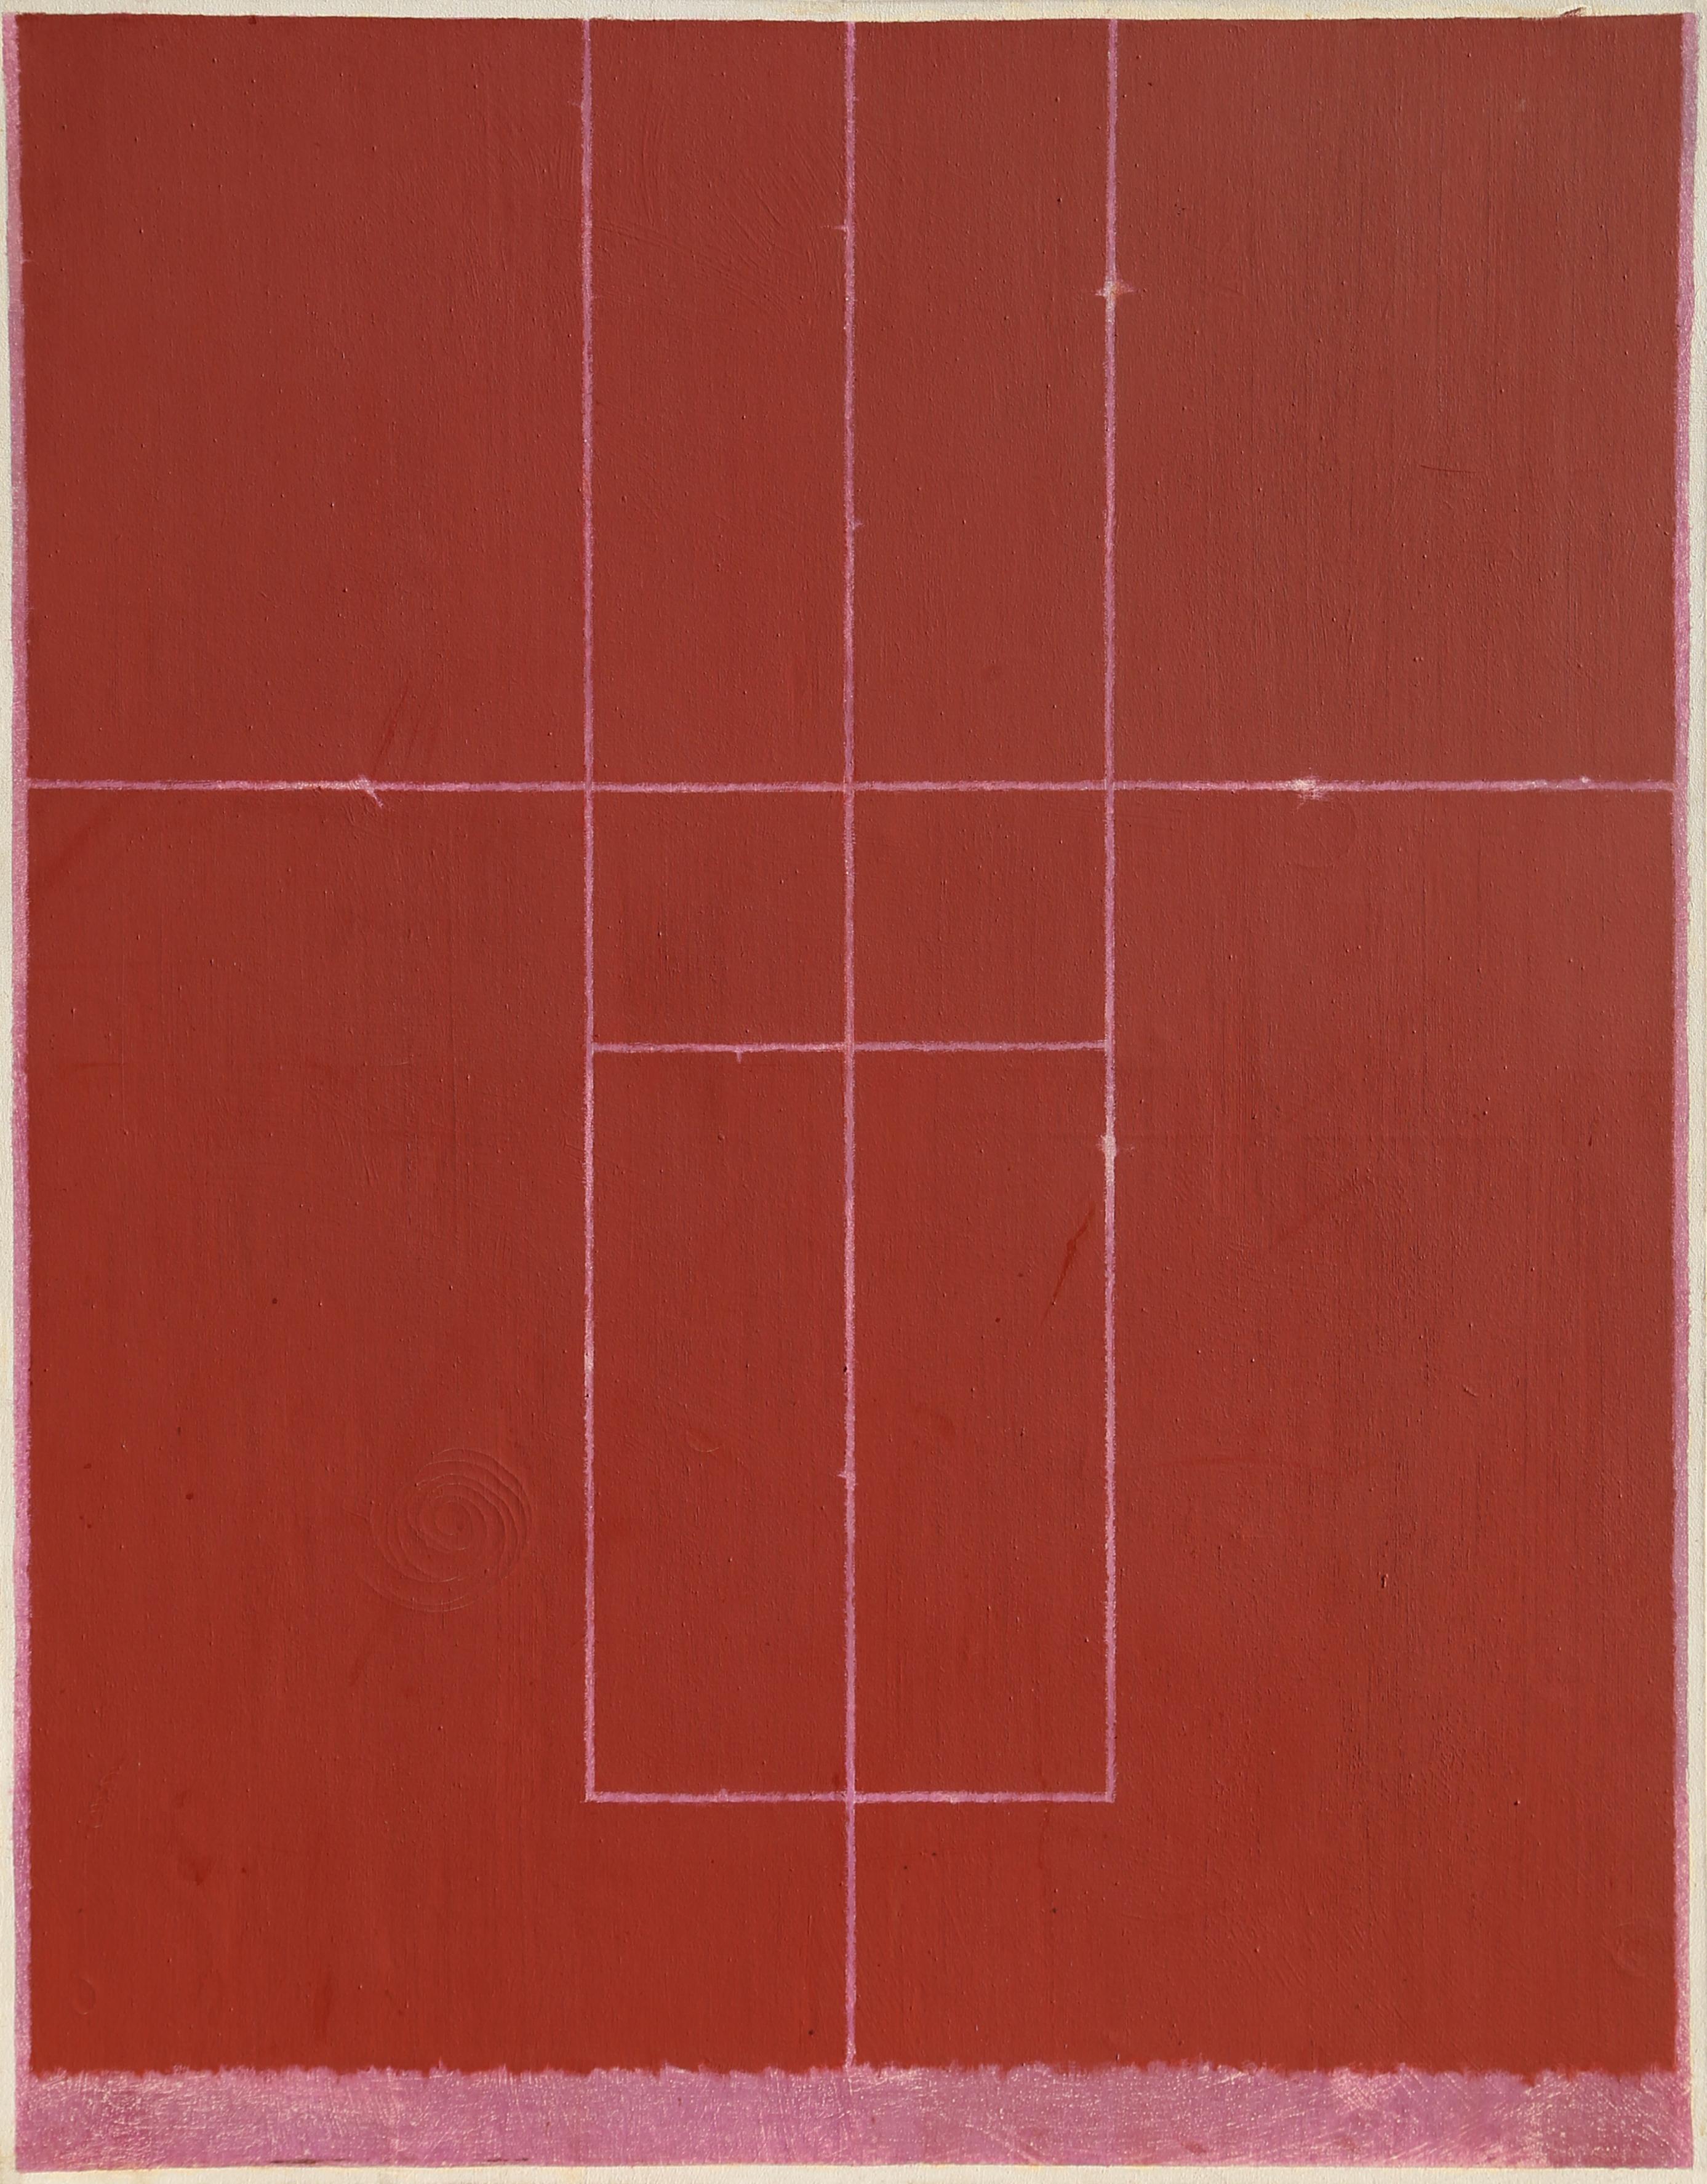 A large, minimalist painting by American Artist, Lou Fink. Provenance: Environment Gallery, NYC ; Gift of Florence Fink, wife of the artist.

Artist:	Lou Fink, American (1925 - 1980)
Title:	Red Series No. 1
Year:	1980
Medium: Oil on Canvas
Size: